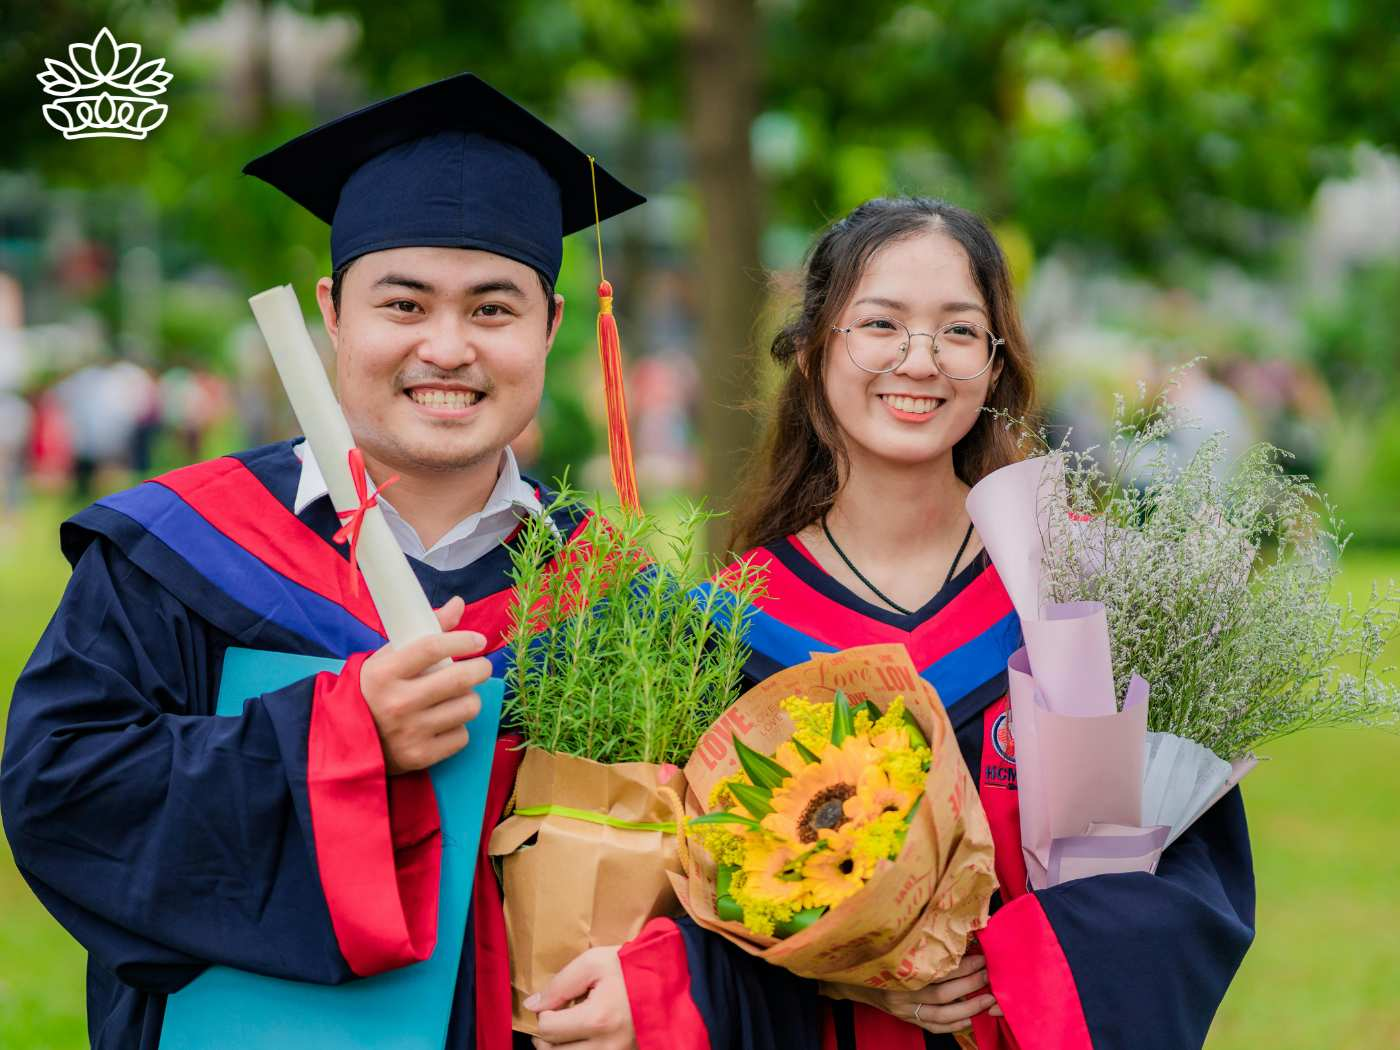 Cheerful male and female graduates holding diplomas and vibrant flower bouquets, celebrating their graduation day together outdoors. Graduation Flowers Delivered with Heart by Fabulous Flowers and Gifts.